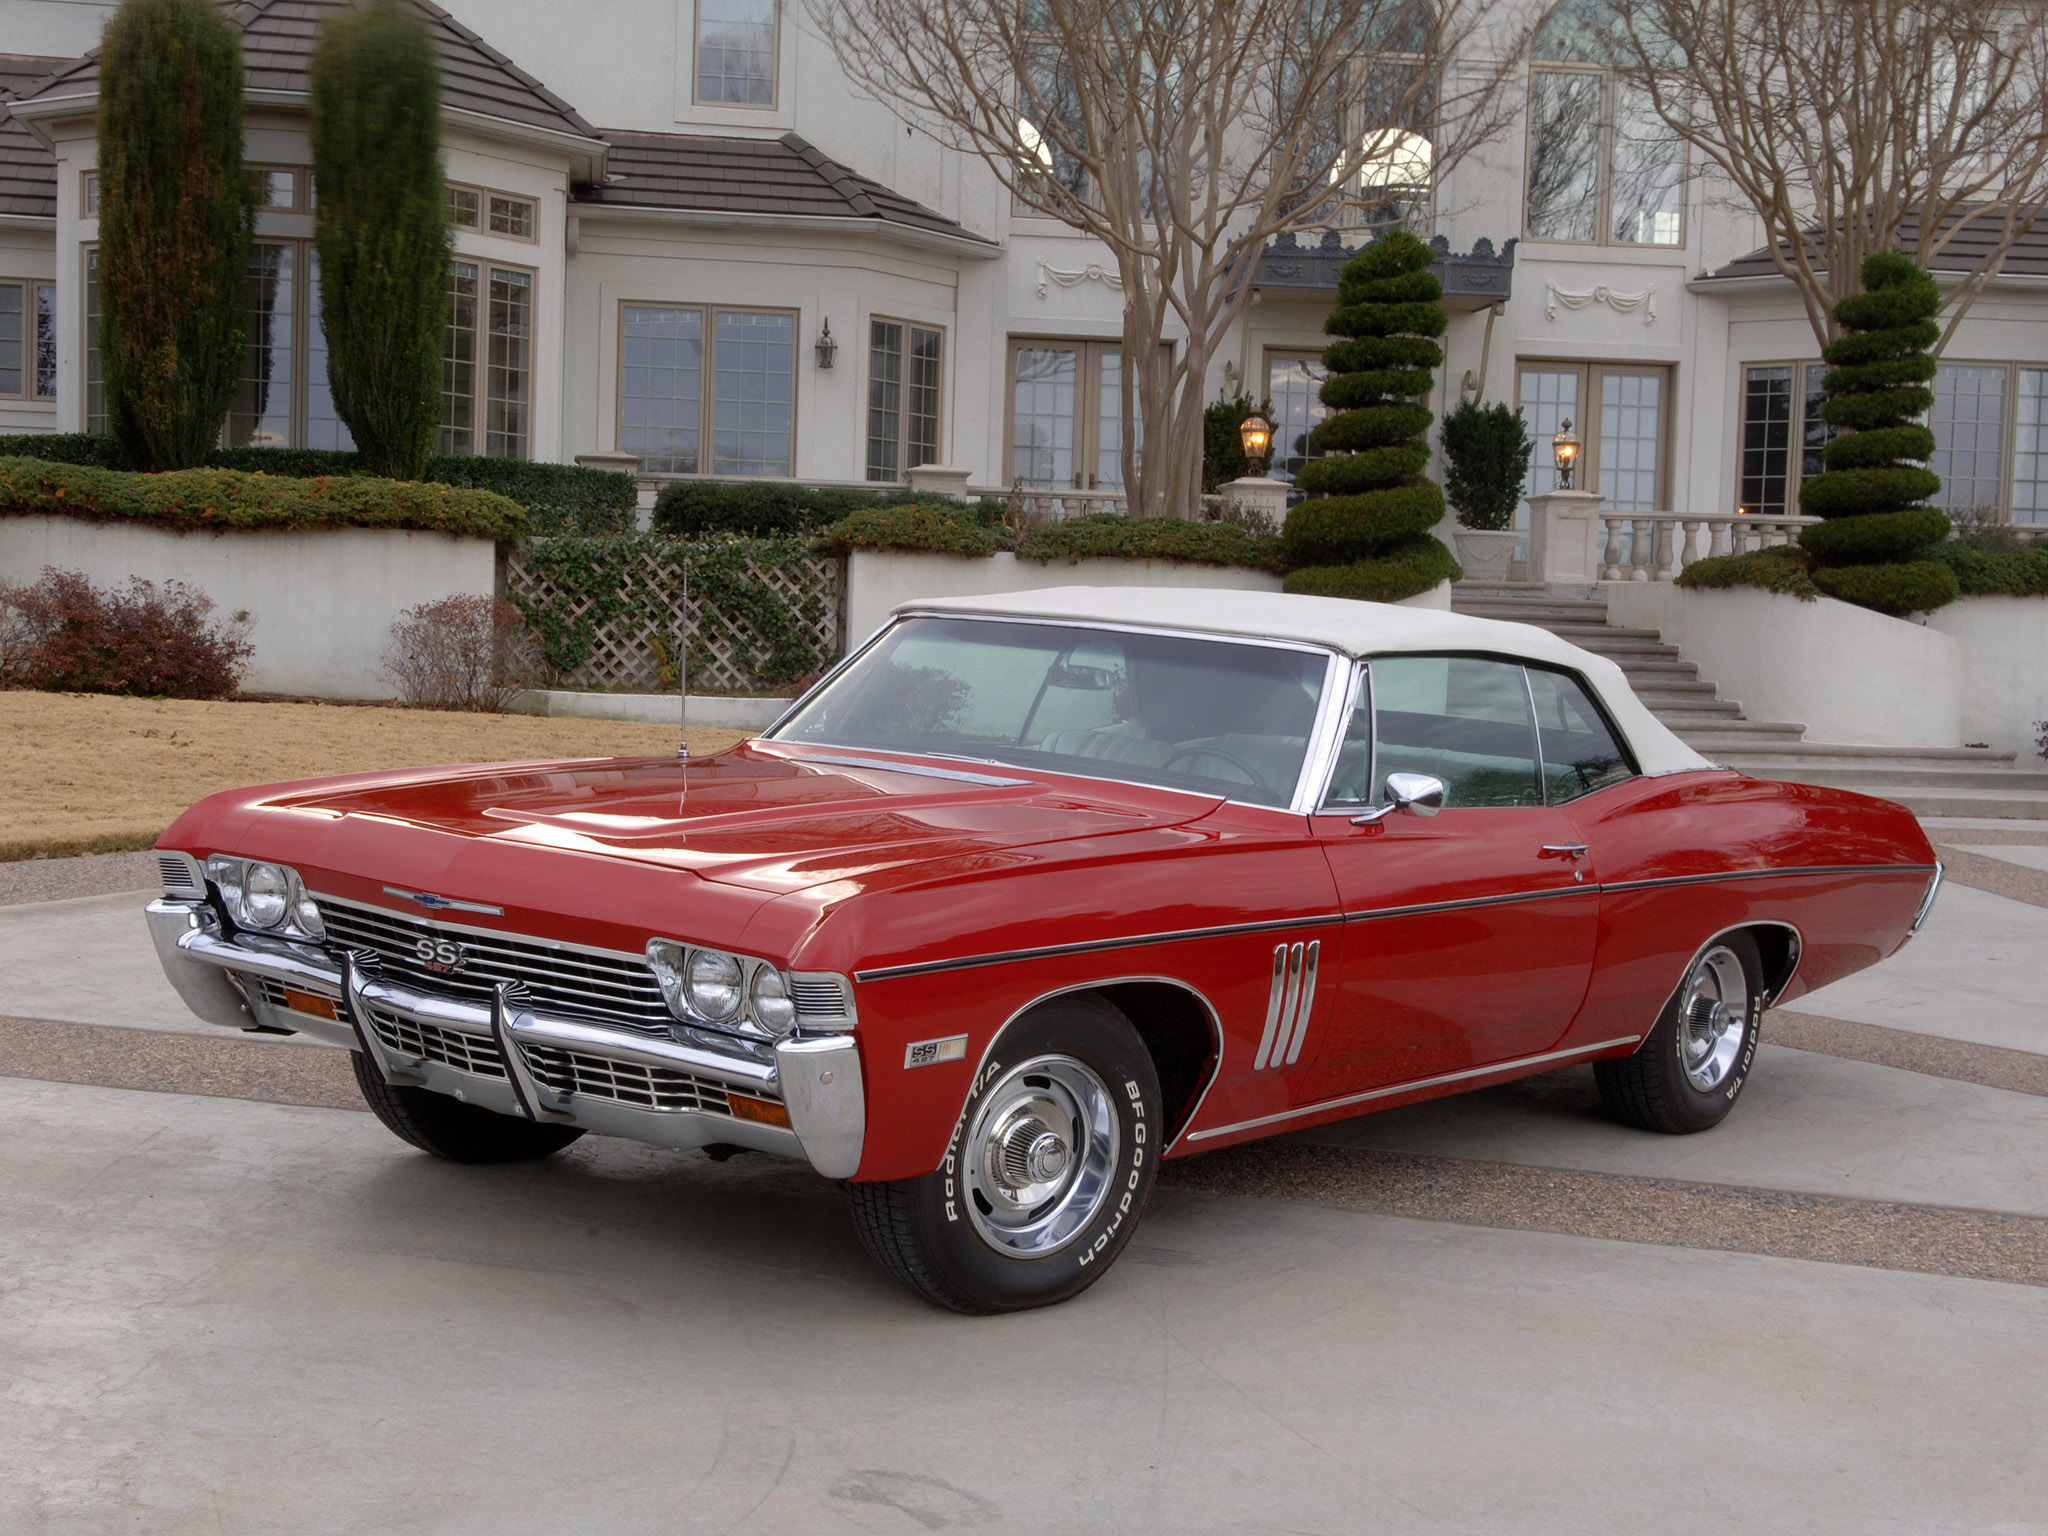 1968, Chevrolet, Impala, S s, 427, Convertible, Classic, Muscle Wallpaper